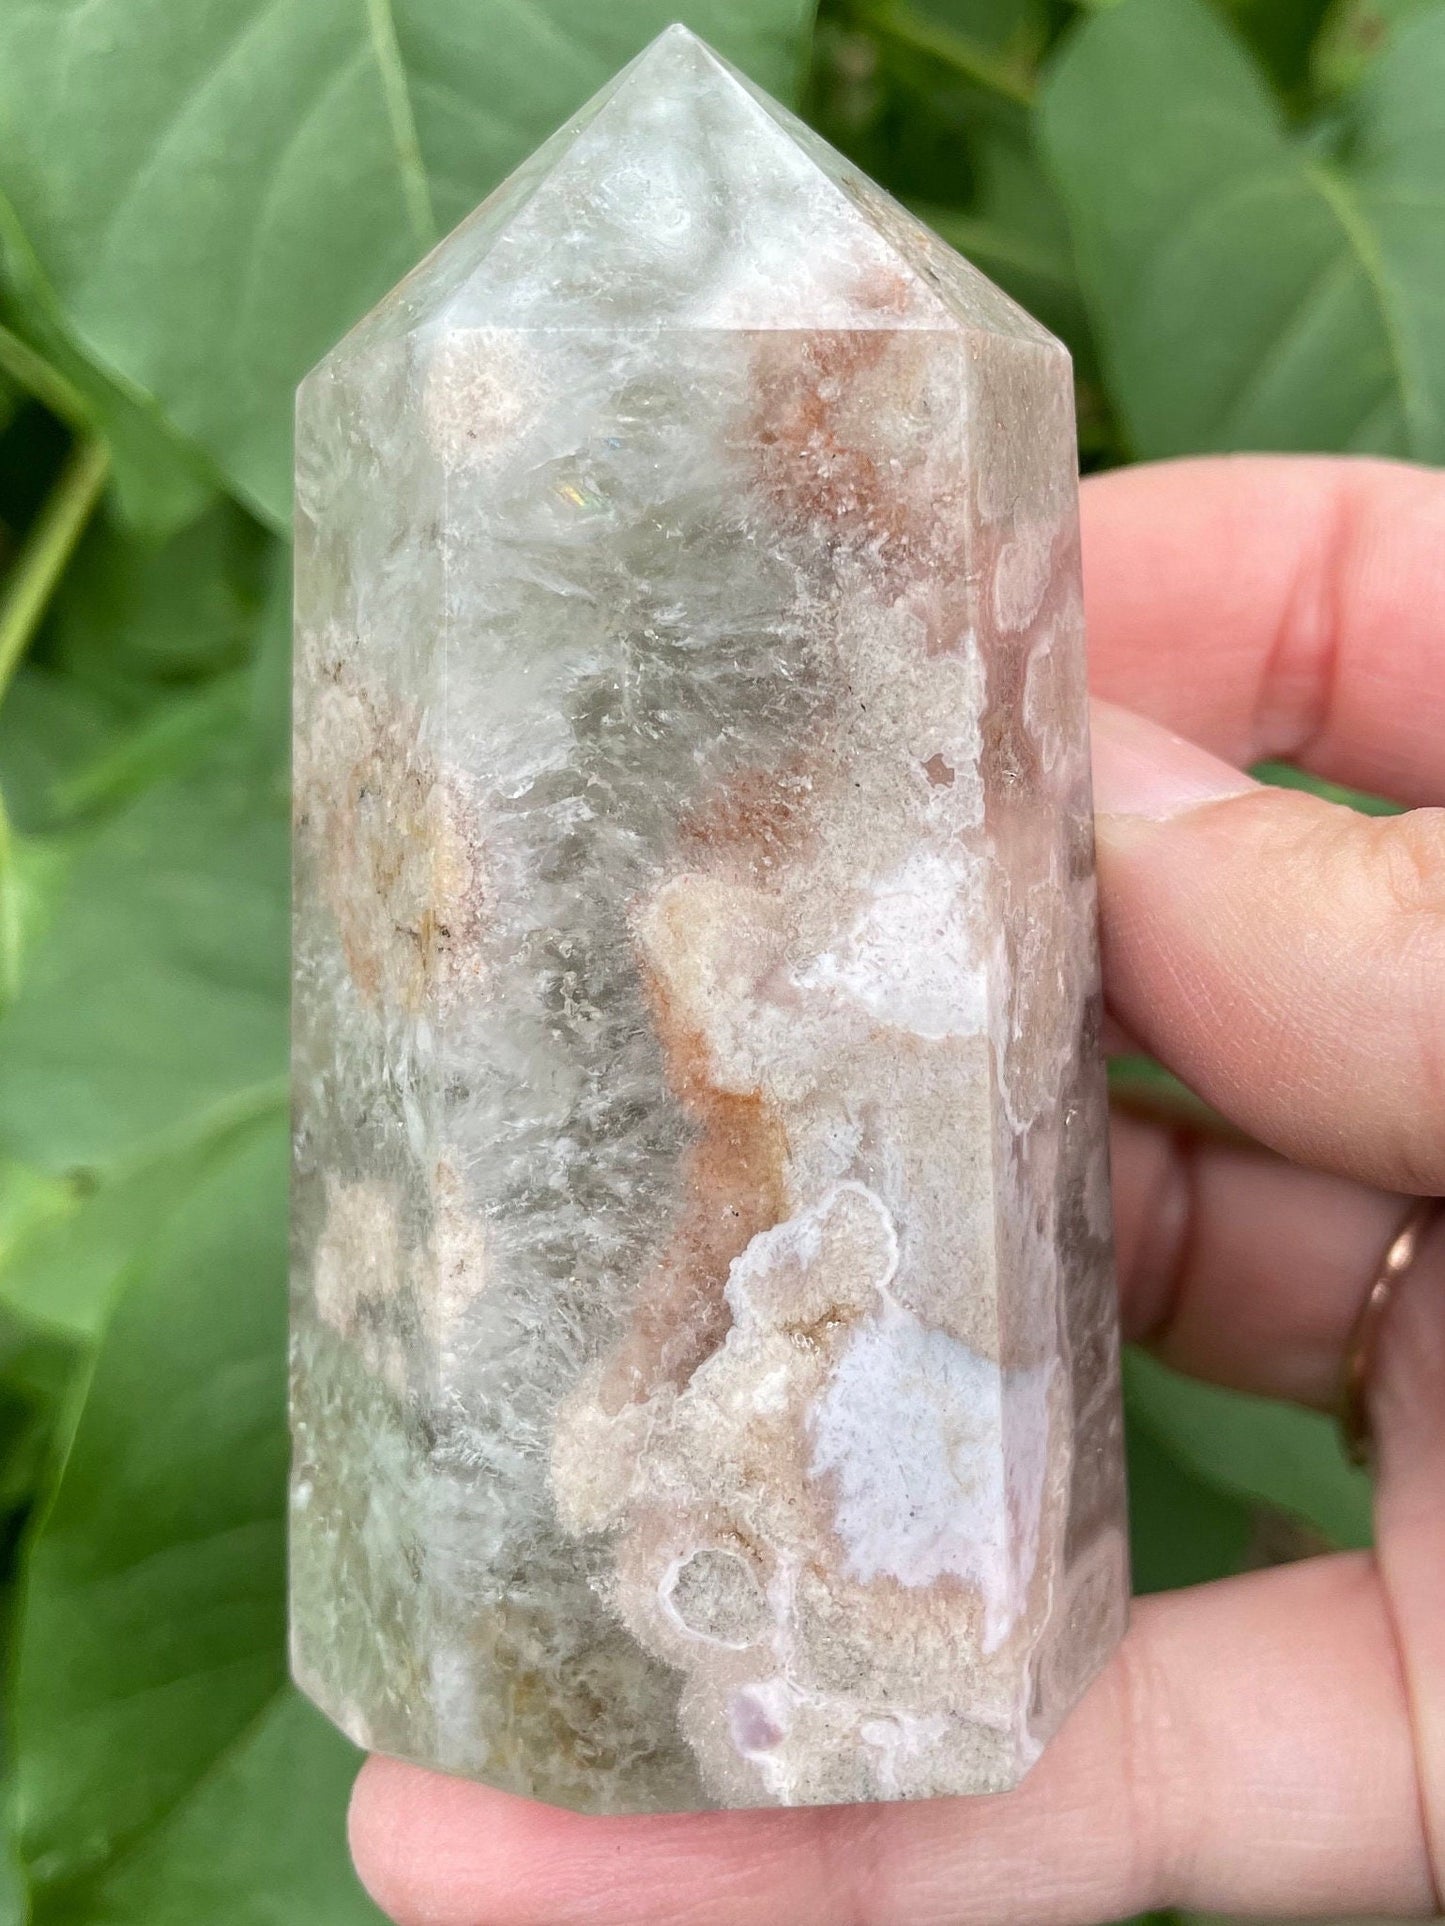 Green Quartz with Flower Agate Tower